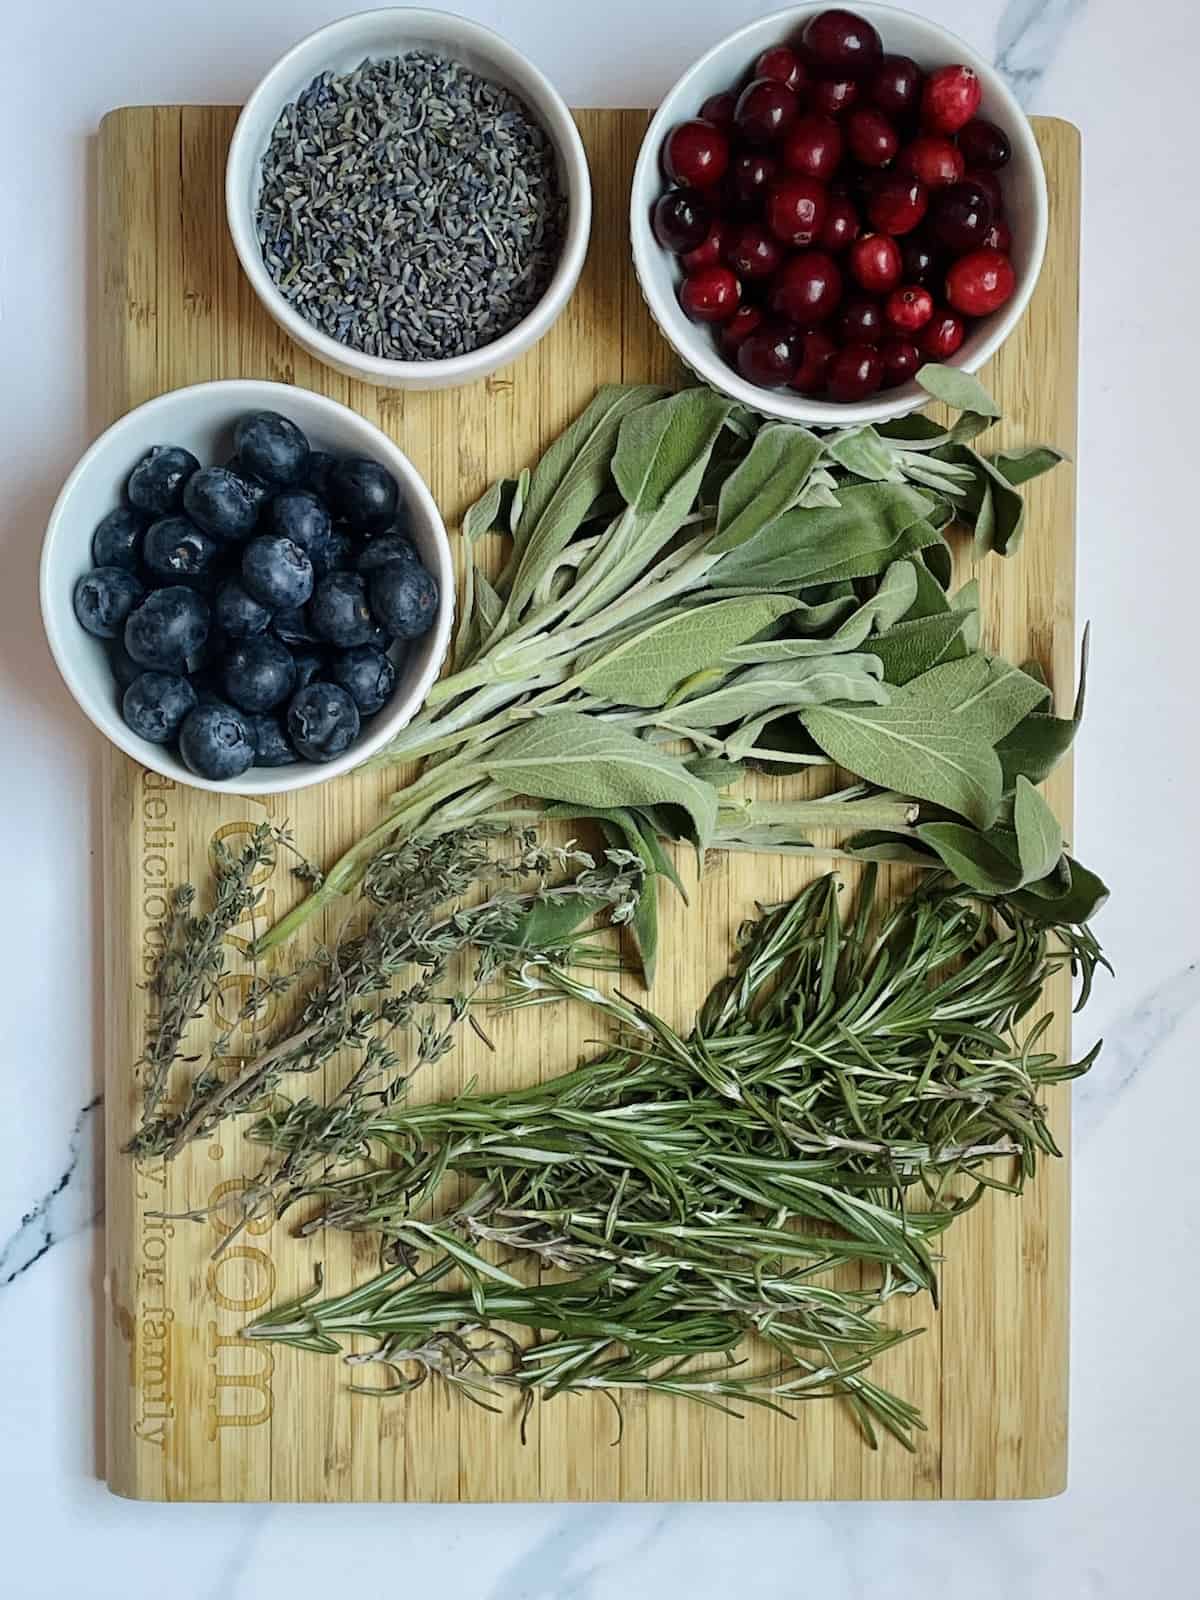 sage, rosemary, thyme, cranberries, blueberries and lavender flowers on a cutting board